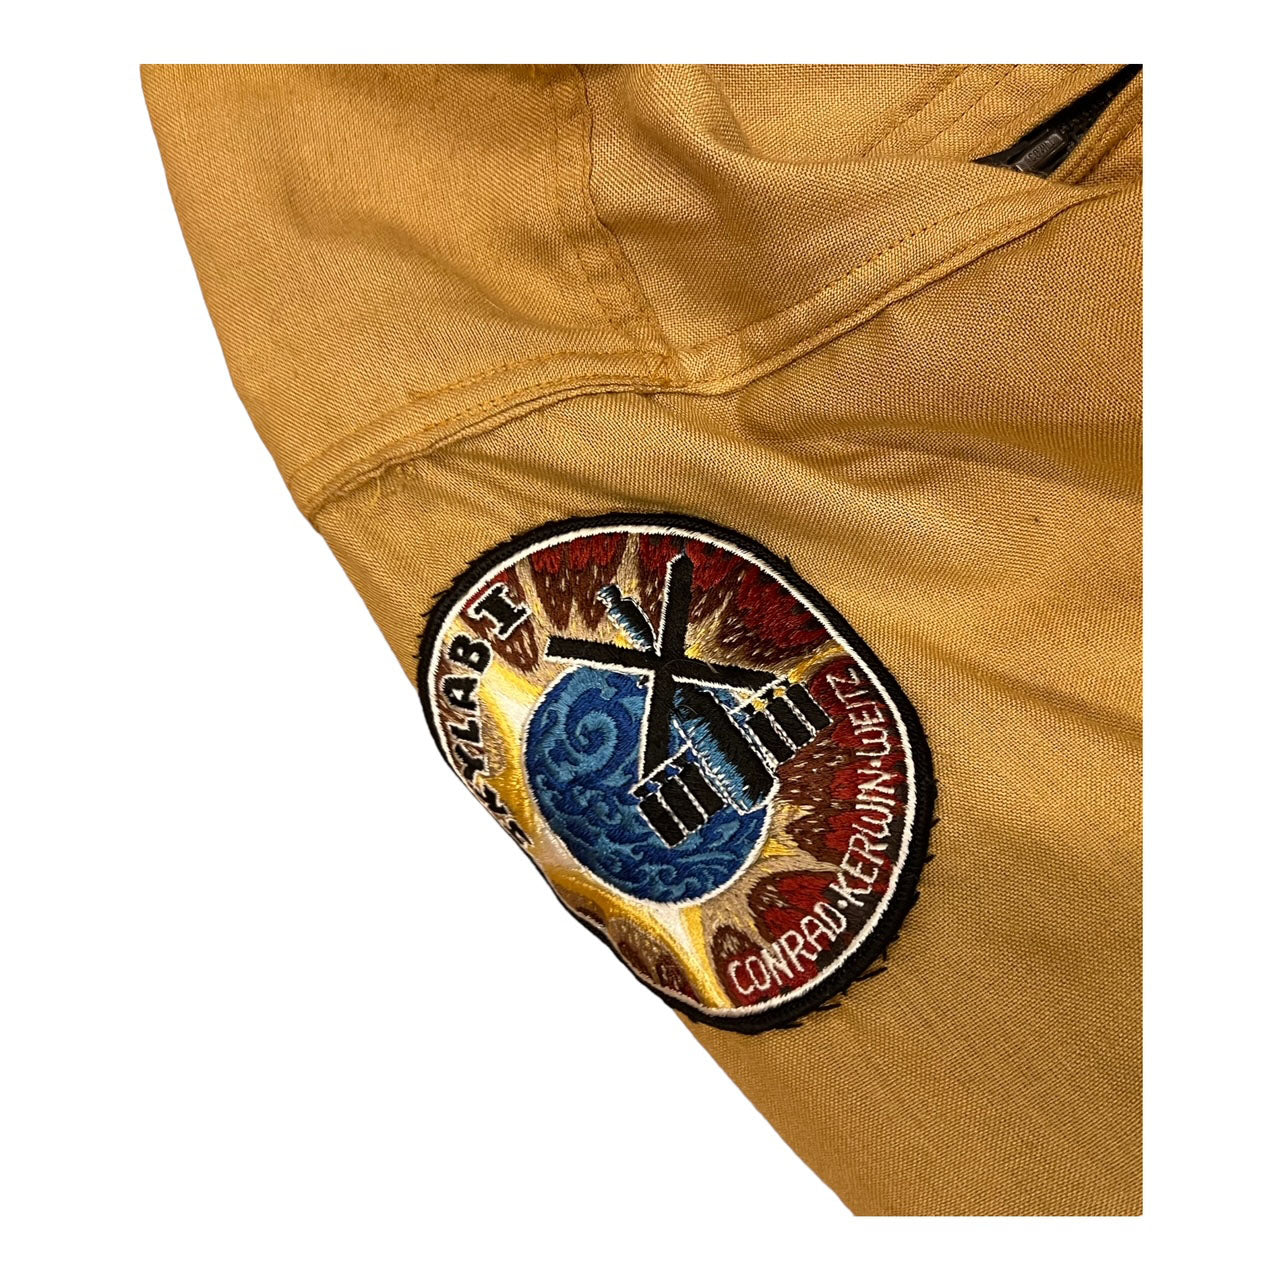 Charles Conrad Skylab training suit - authenticated by Conrad